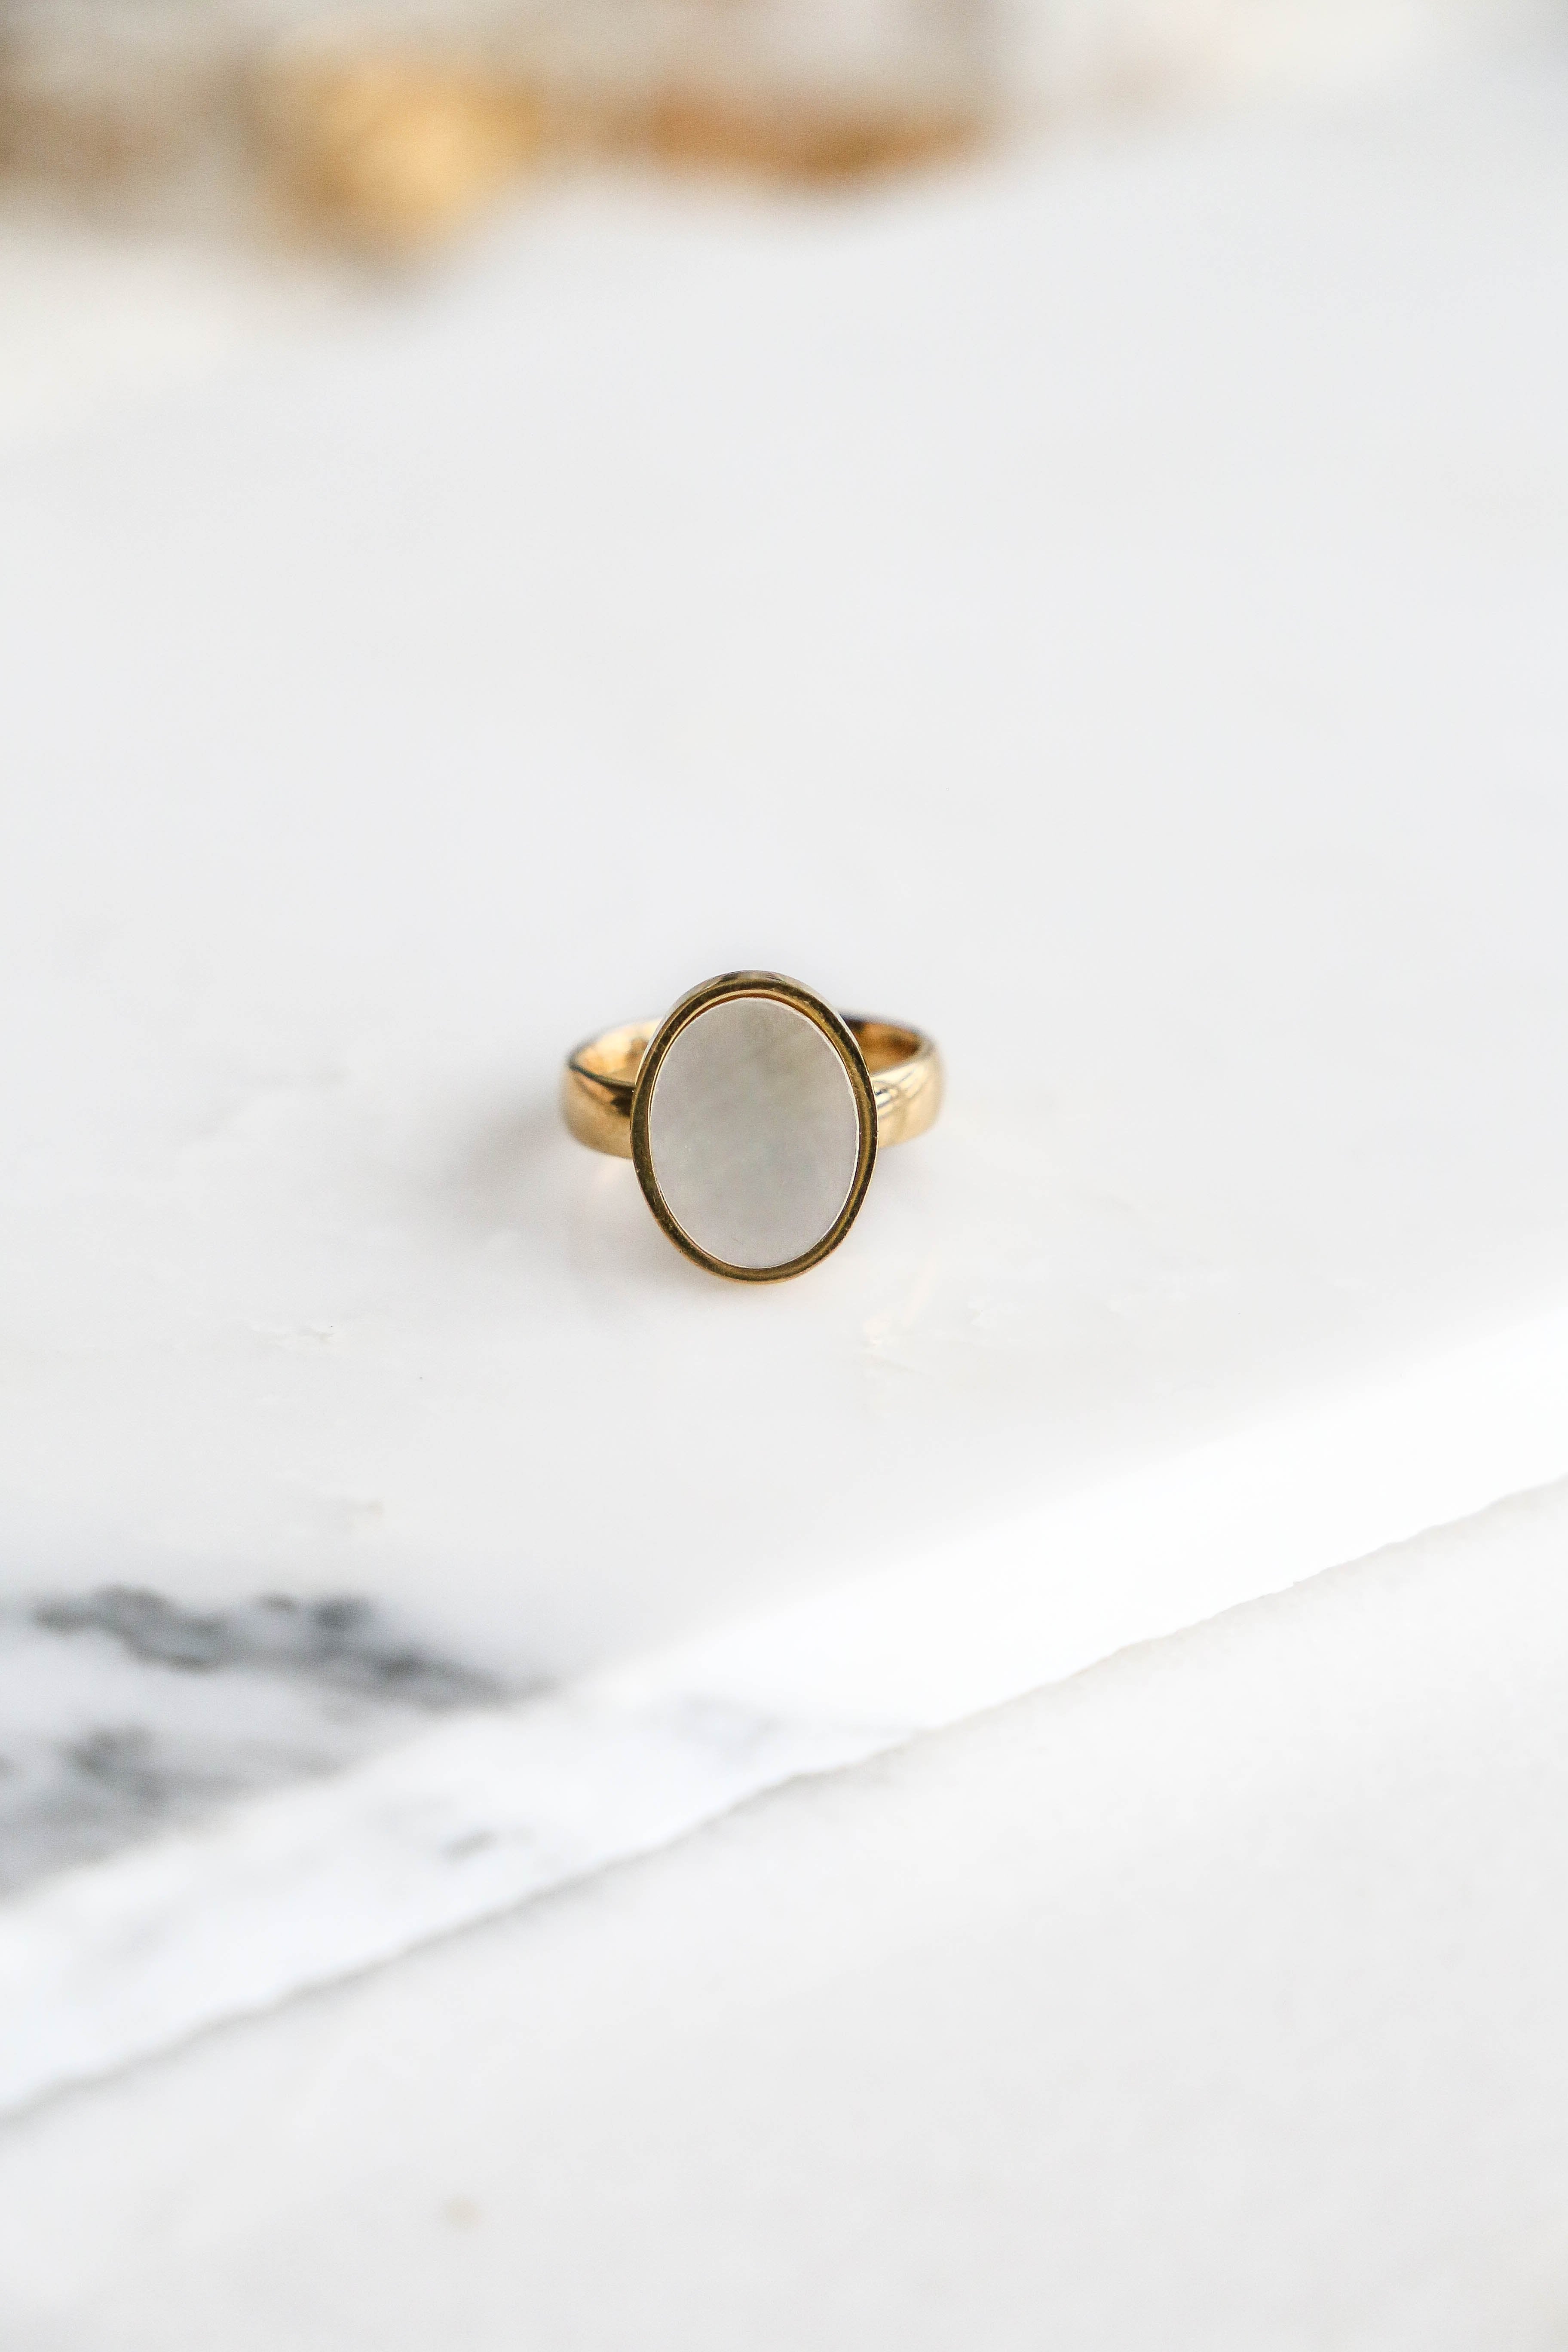 Charlotte Ring - Boutique Minimaliste has waterproof, durable, elegant and vintage inspired jewelry